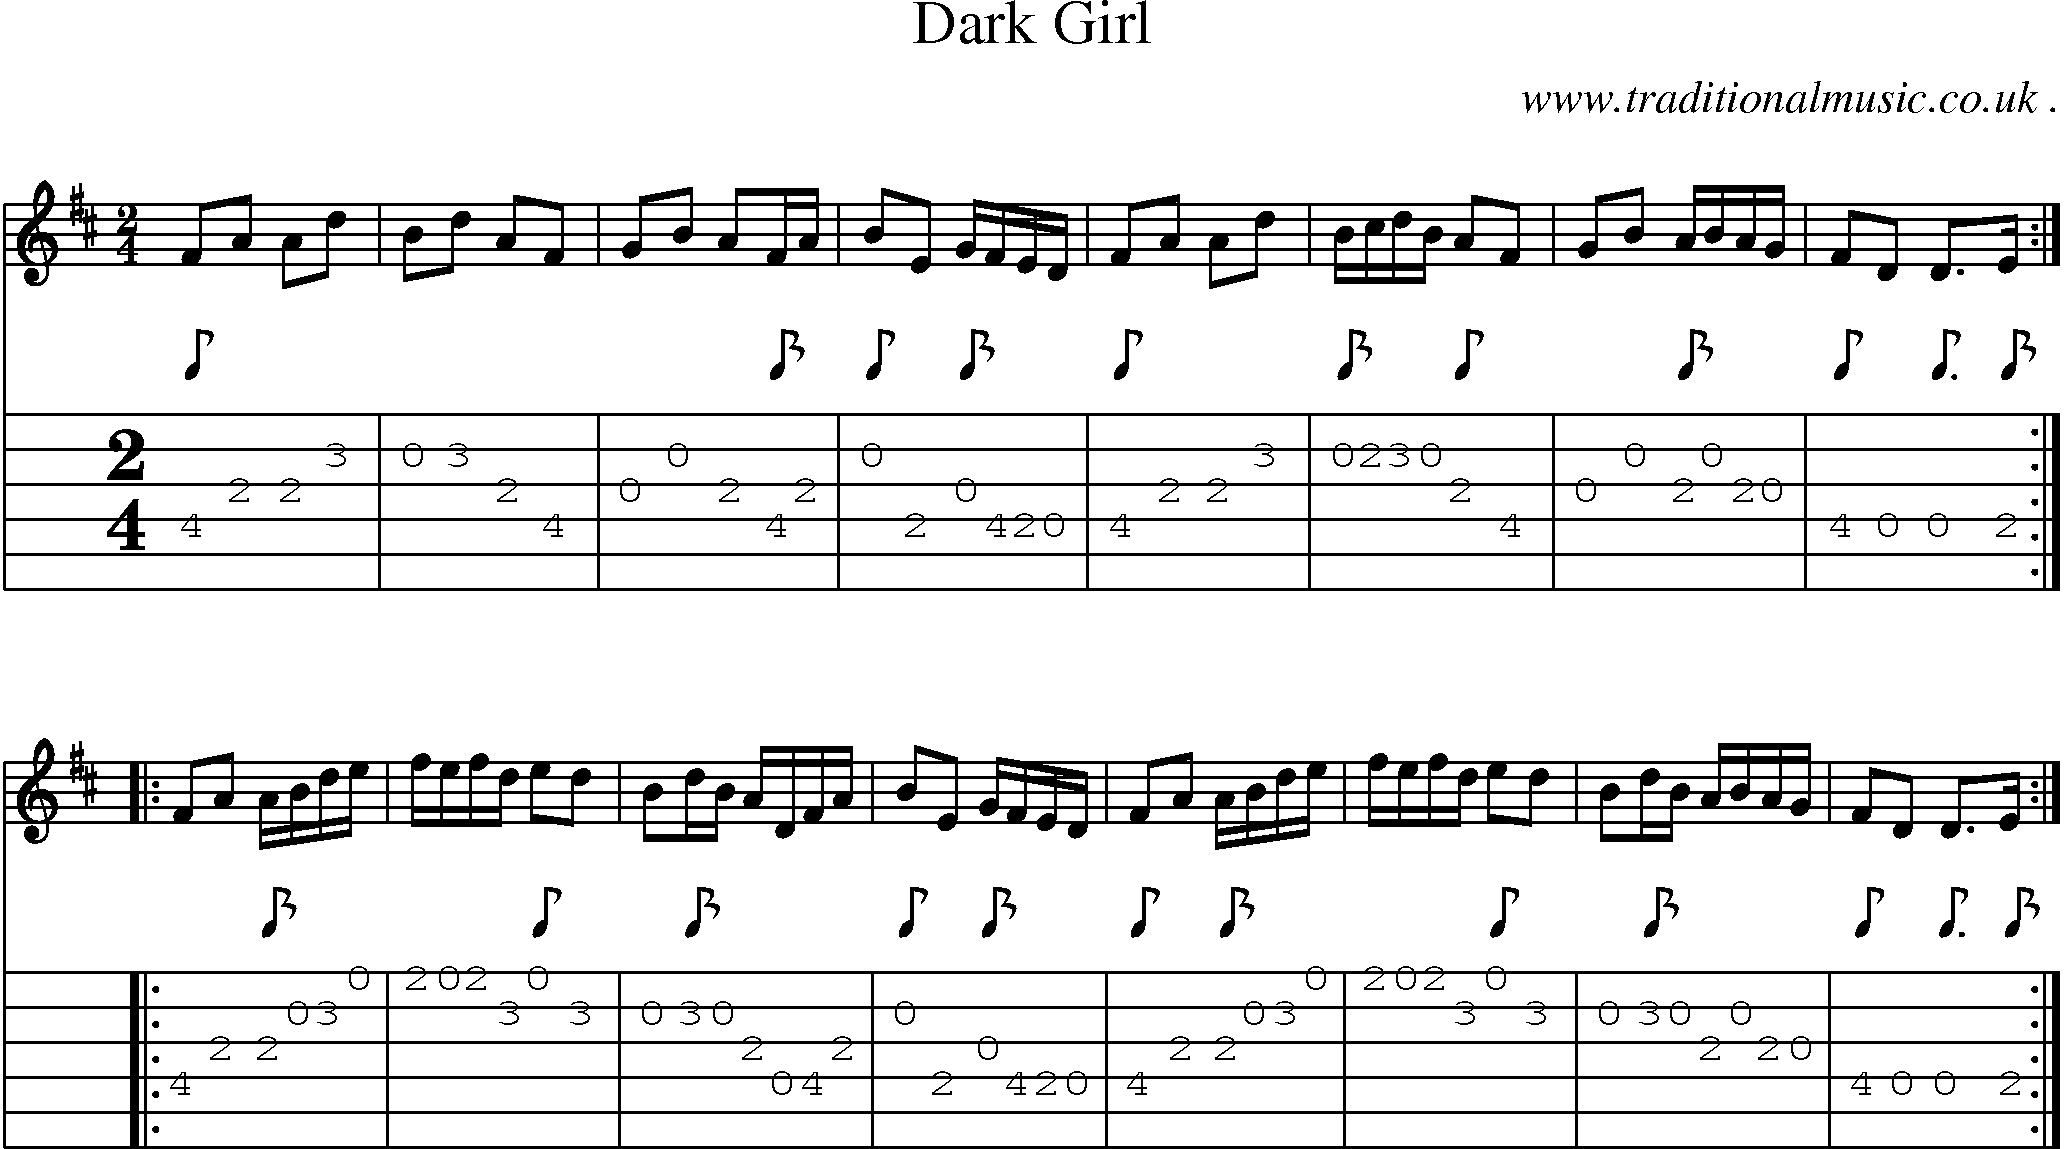 Sheet-Music and Guitar Tabs for Dark Girl